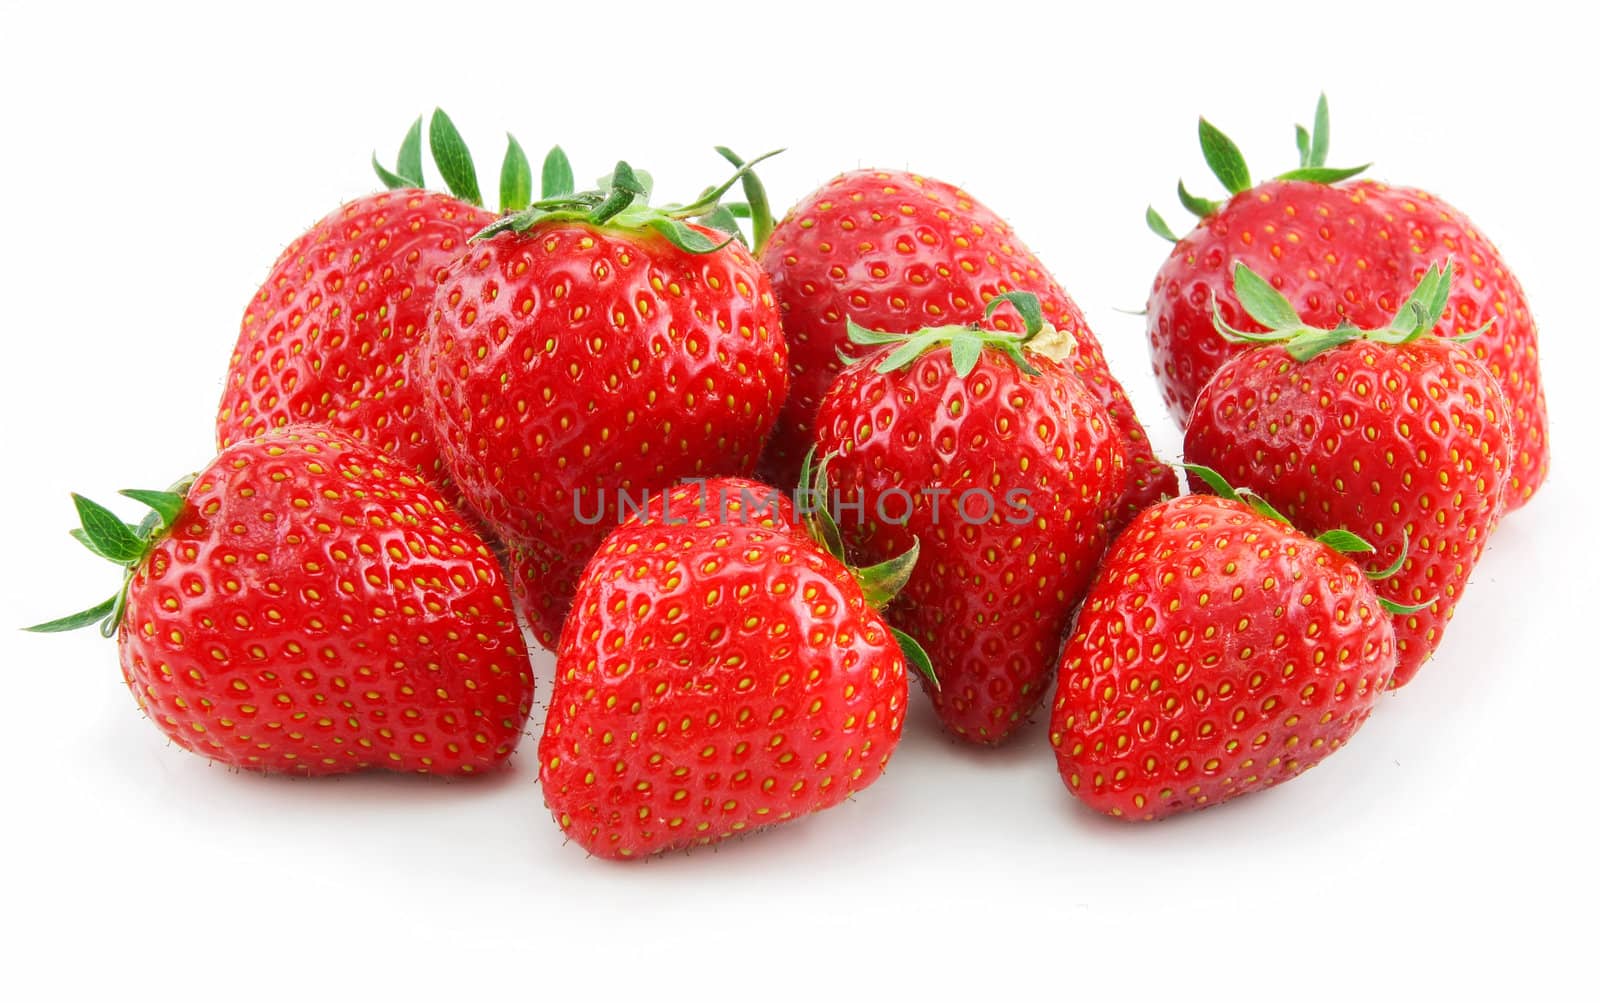 Ripe Strawberries Isolated on White Background